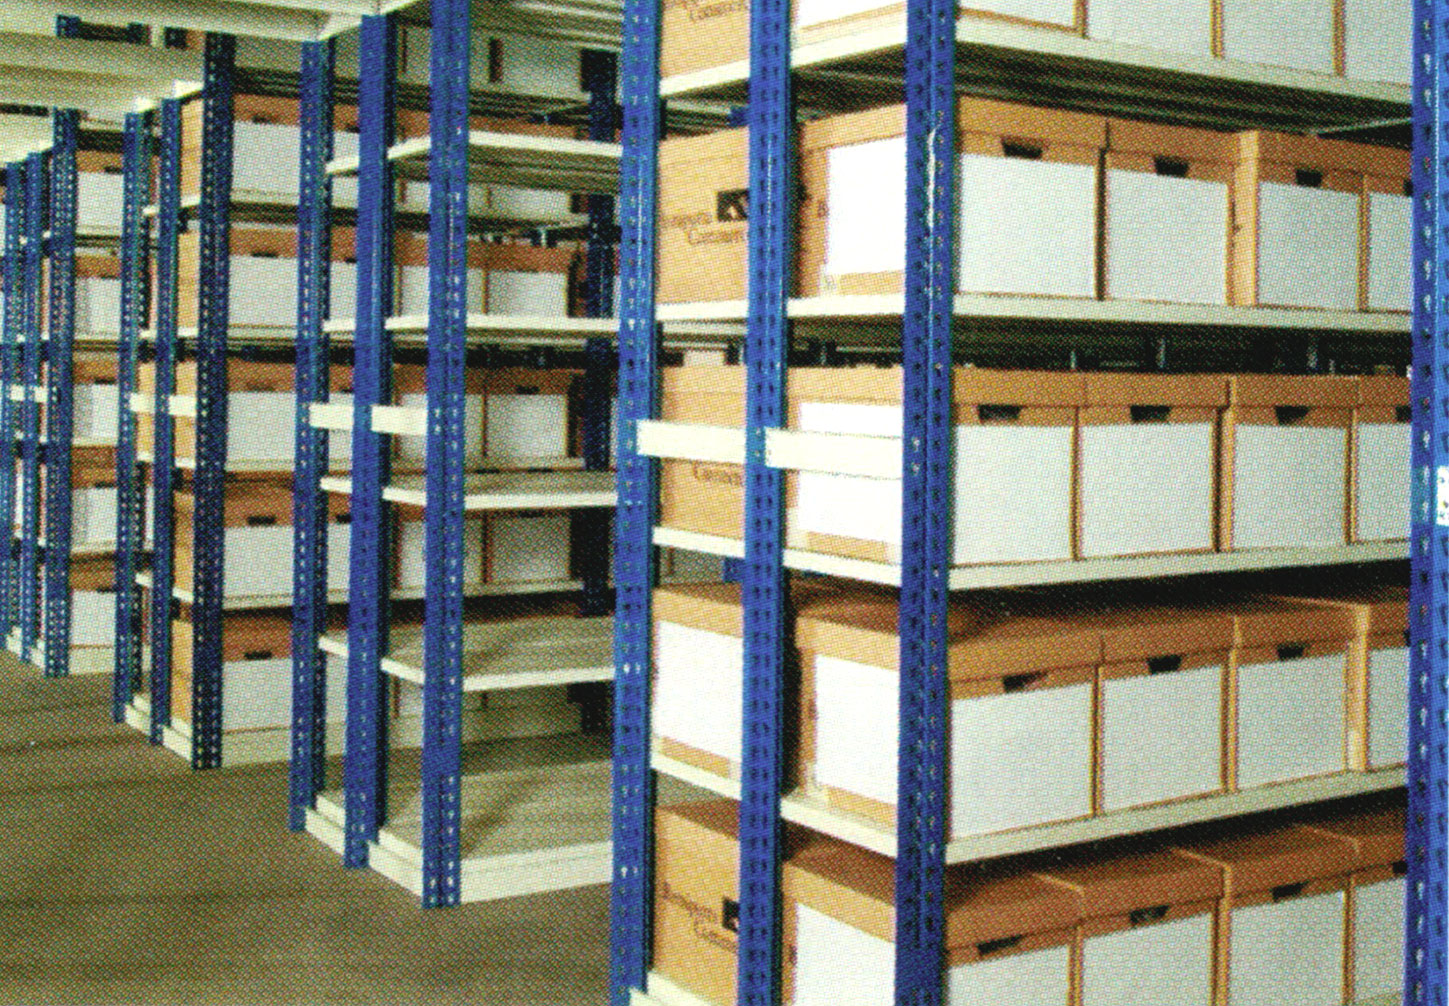 Boltless Shelving System for an Archieve Storage Facility